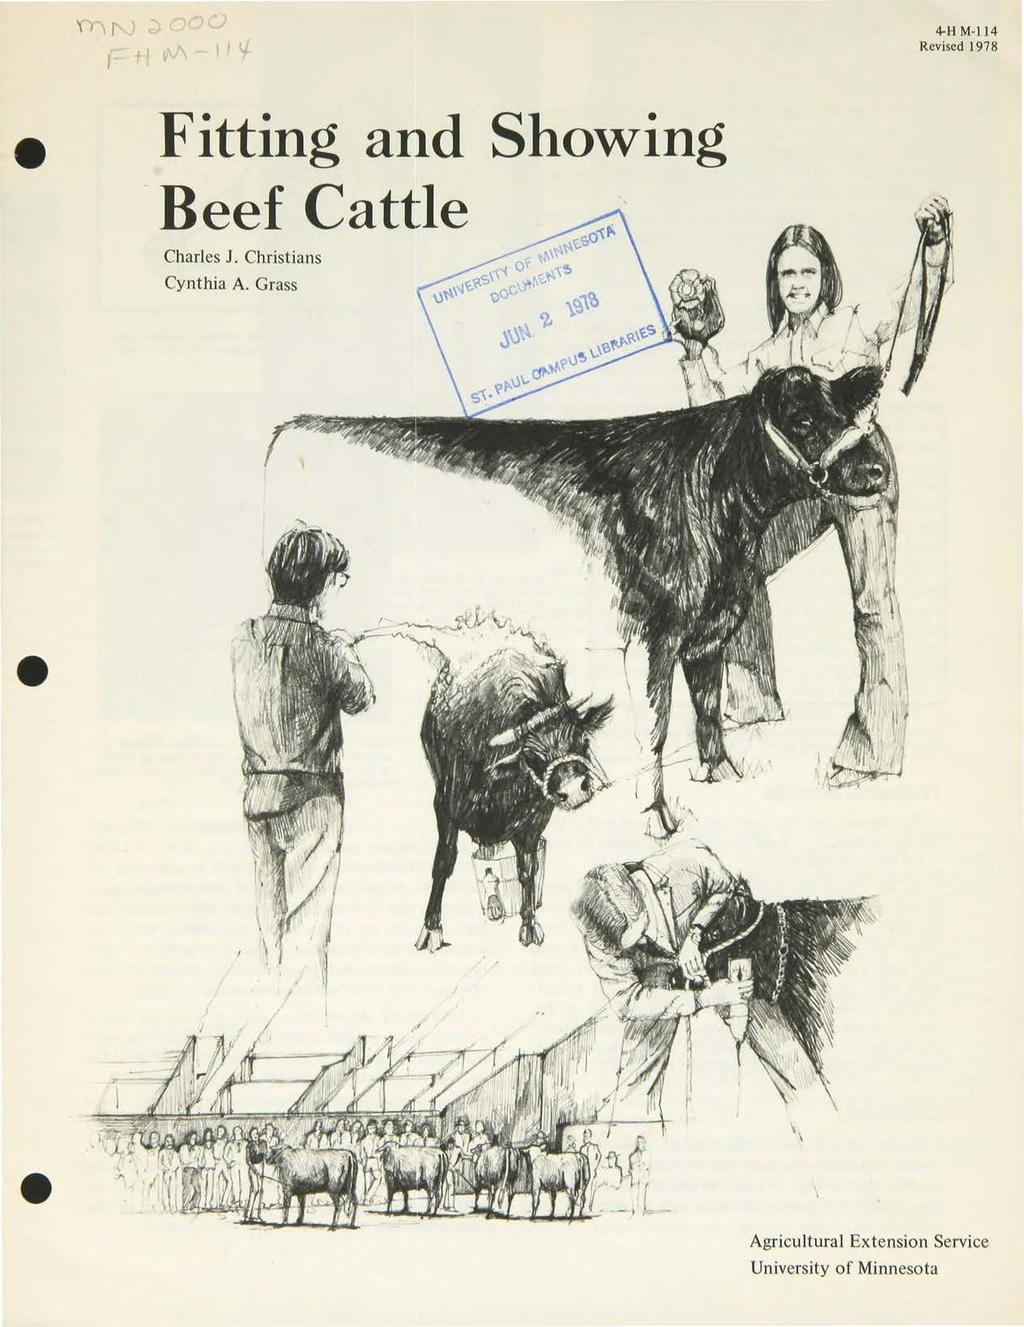 4-H M-114 Revised 1978 Fitting and Showing Beef Catt~le Charles 1.